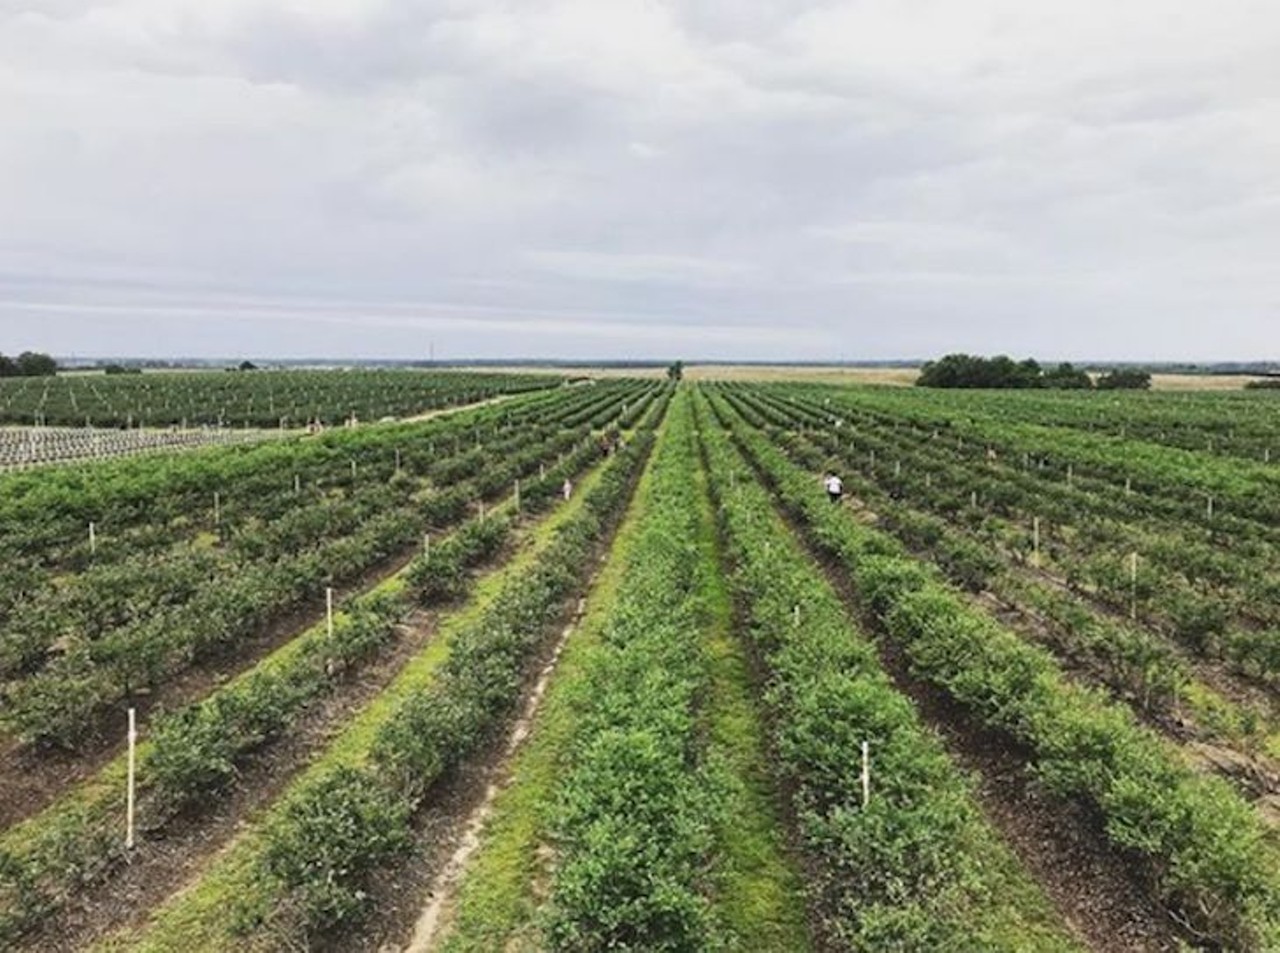 Southern Hill Farms
16651 Schofield Rd., Clermont, 407-986-5806
Days are varying but the time remains the same, from 9 a.m. to 4 p.m., you can stop by and pick 10 different varieties of blueberries for $4 per pound on 40-acres of blueberry land.
Distance from Orlando: 28 minutes
Photo via courtneymouse/Instagram